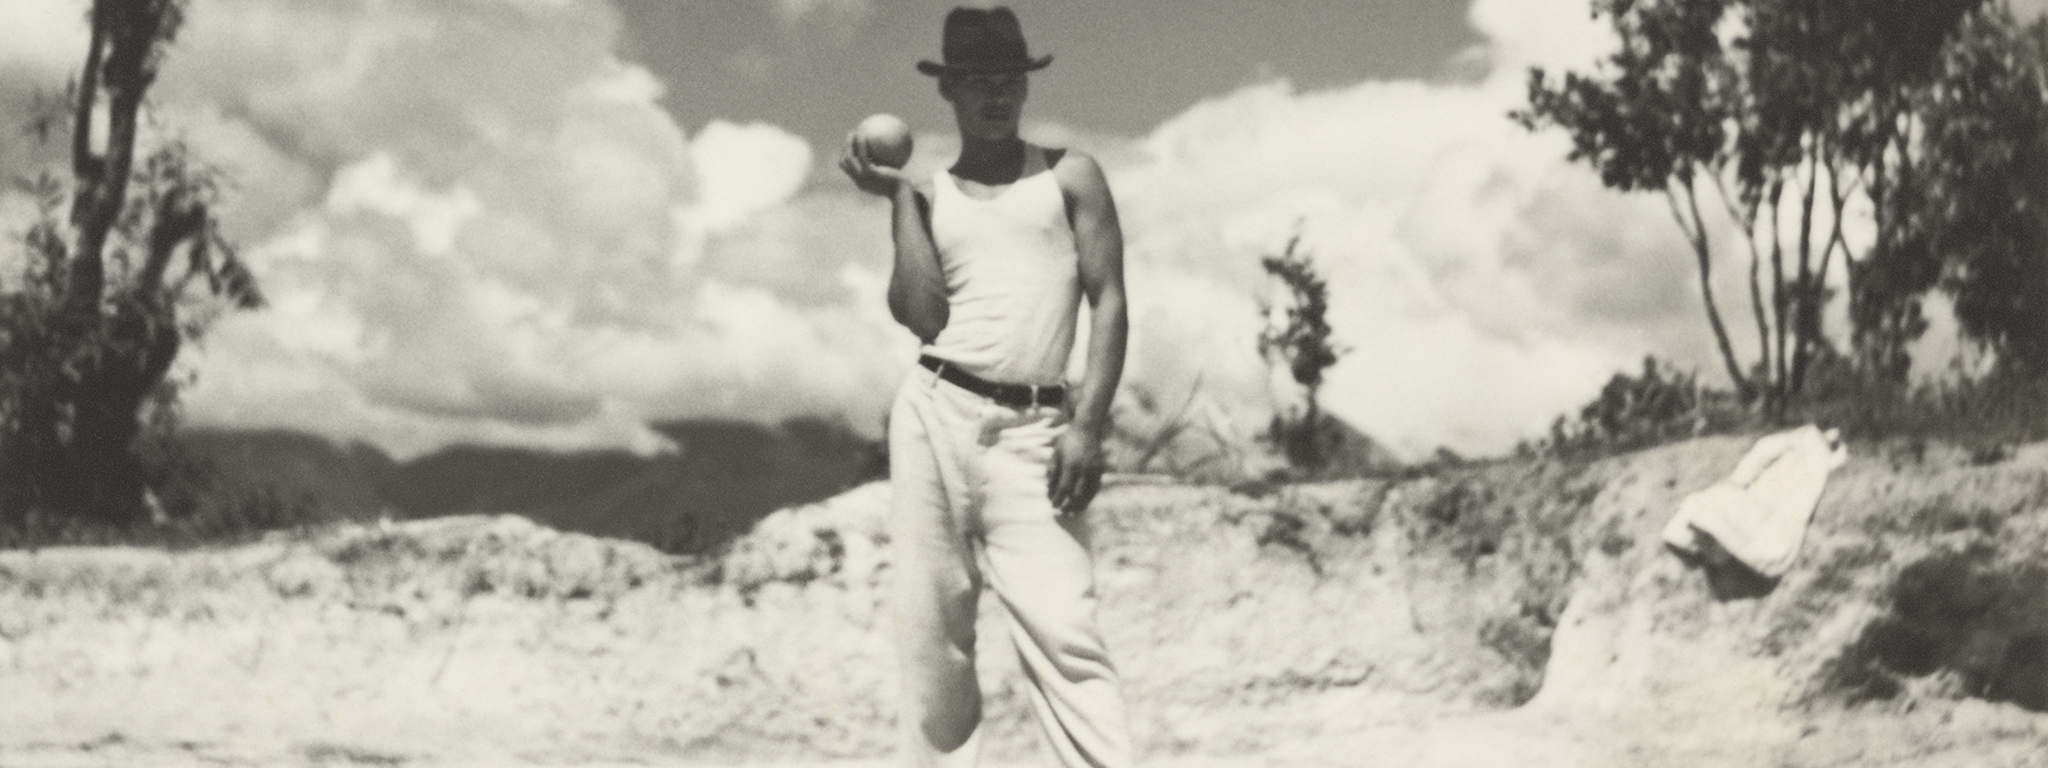 In front of mountains and a bright cloud filled sky, a man dressed in white pants, white t-shirt, and a dark brimmed hat, stands prepared to throw the ball he's holding up in his right palm.